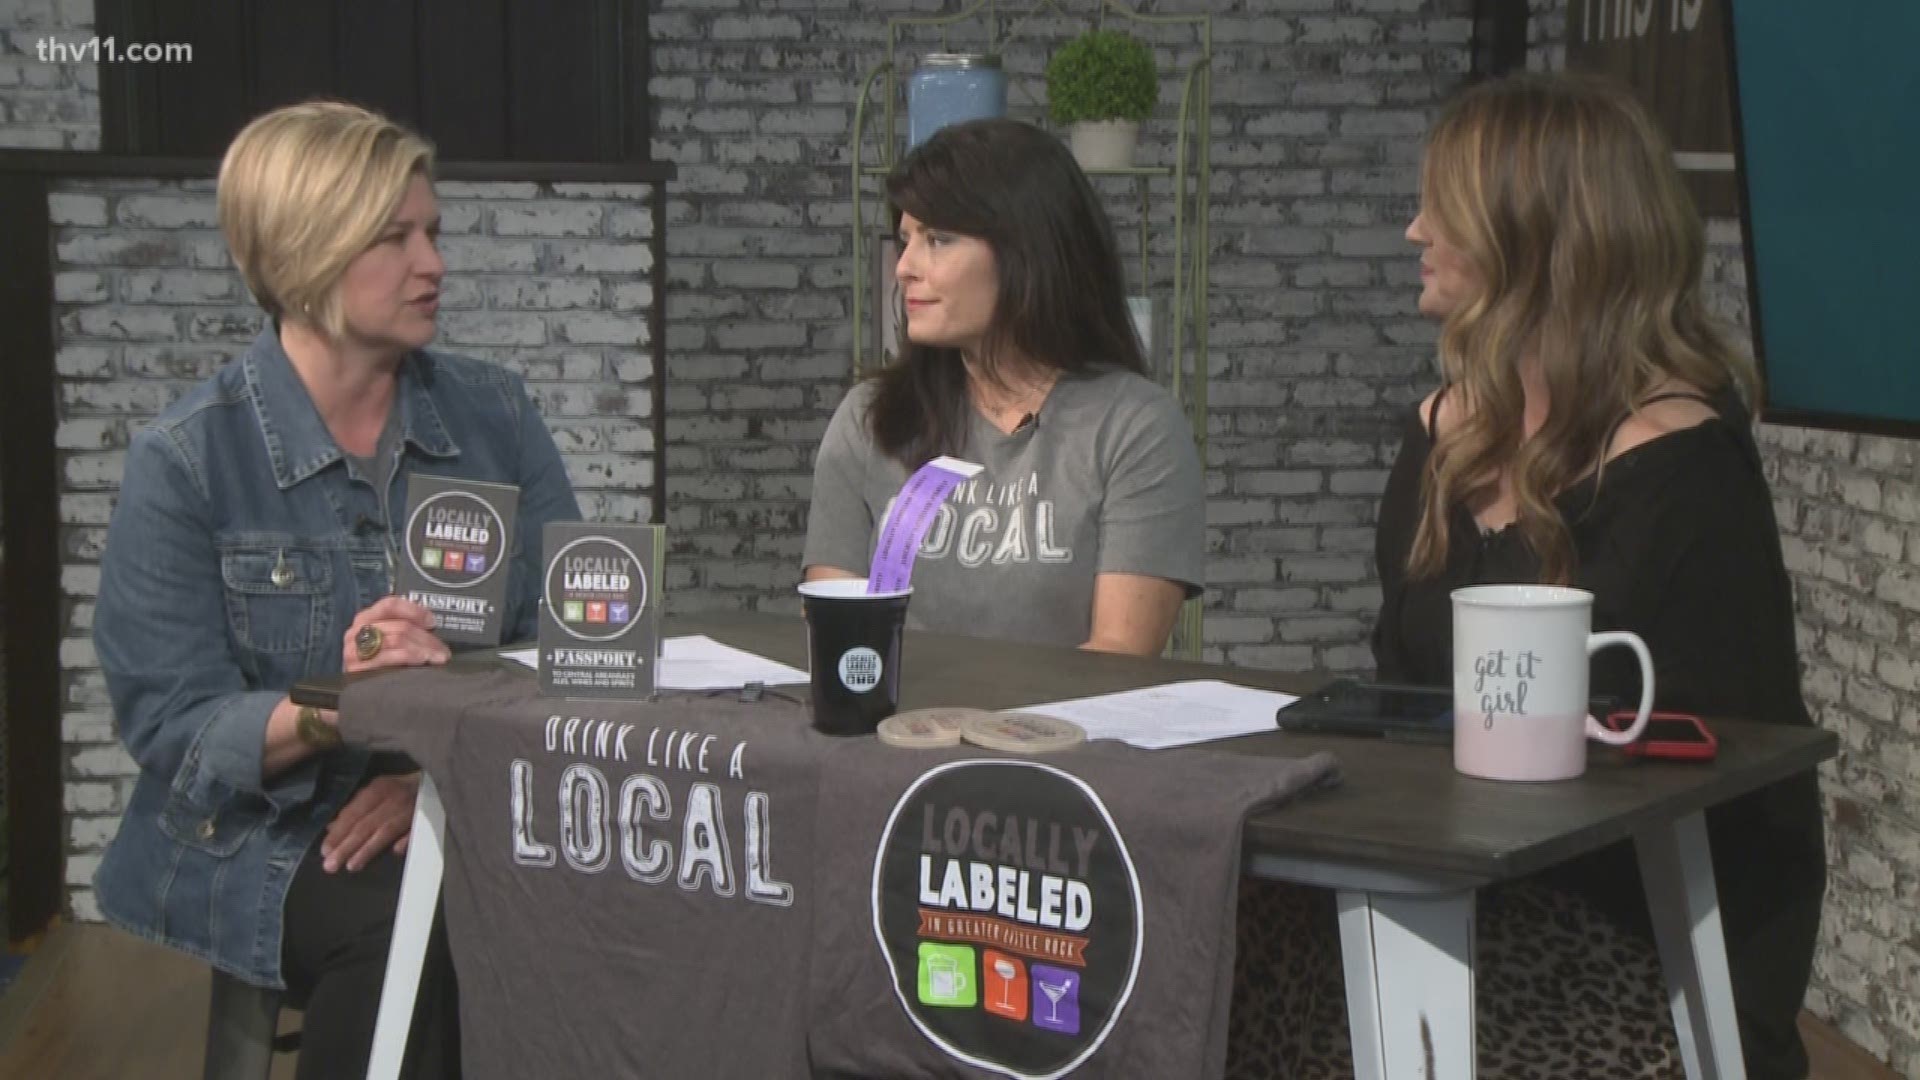 Locally Labeled is scheduled for Thursday, May 16.